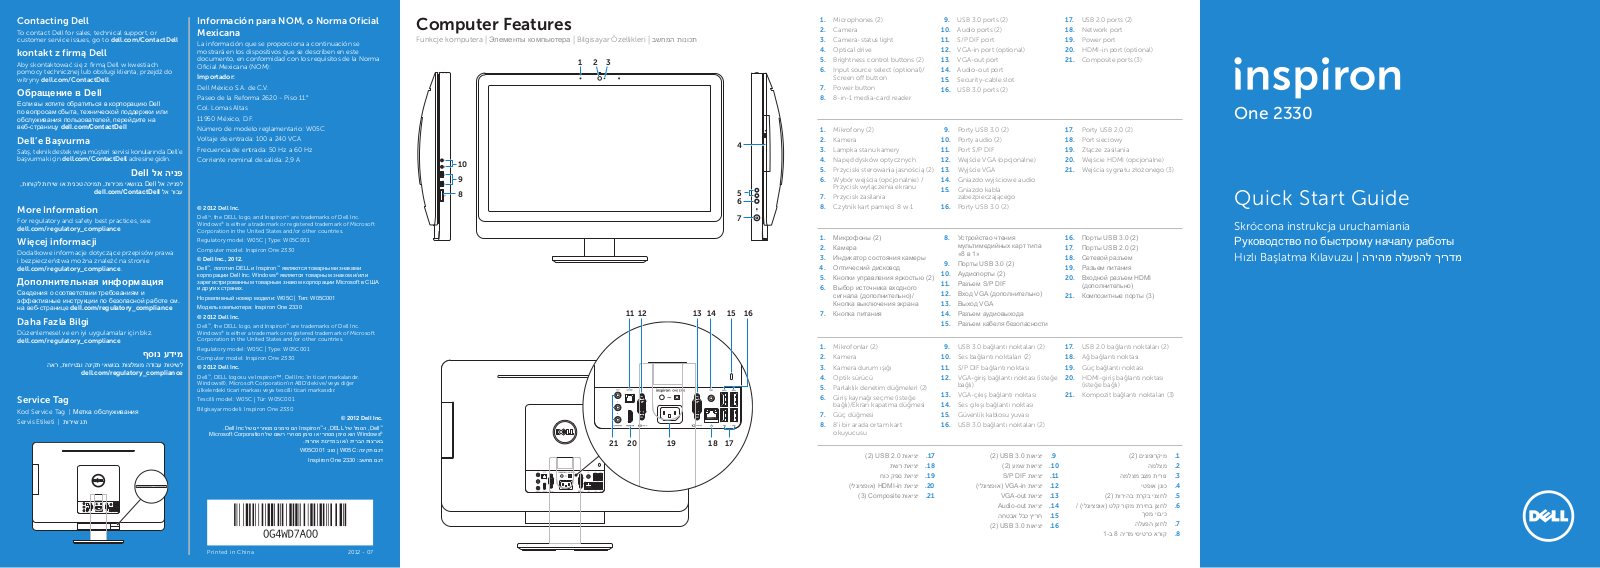 DELL Inspiron One 2330 User Manual